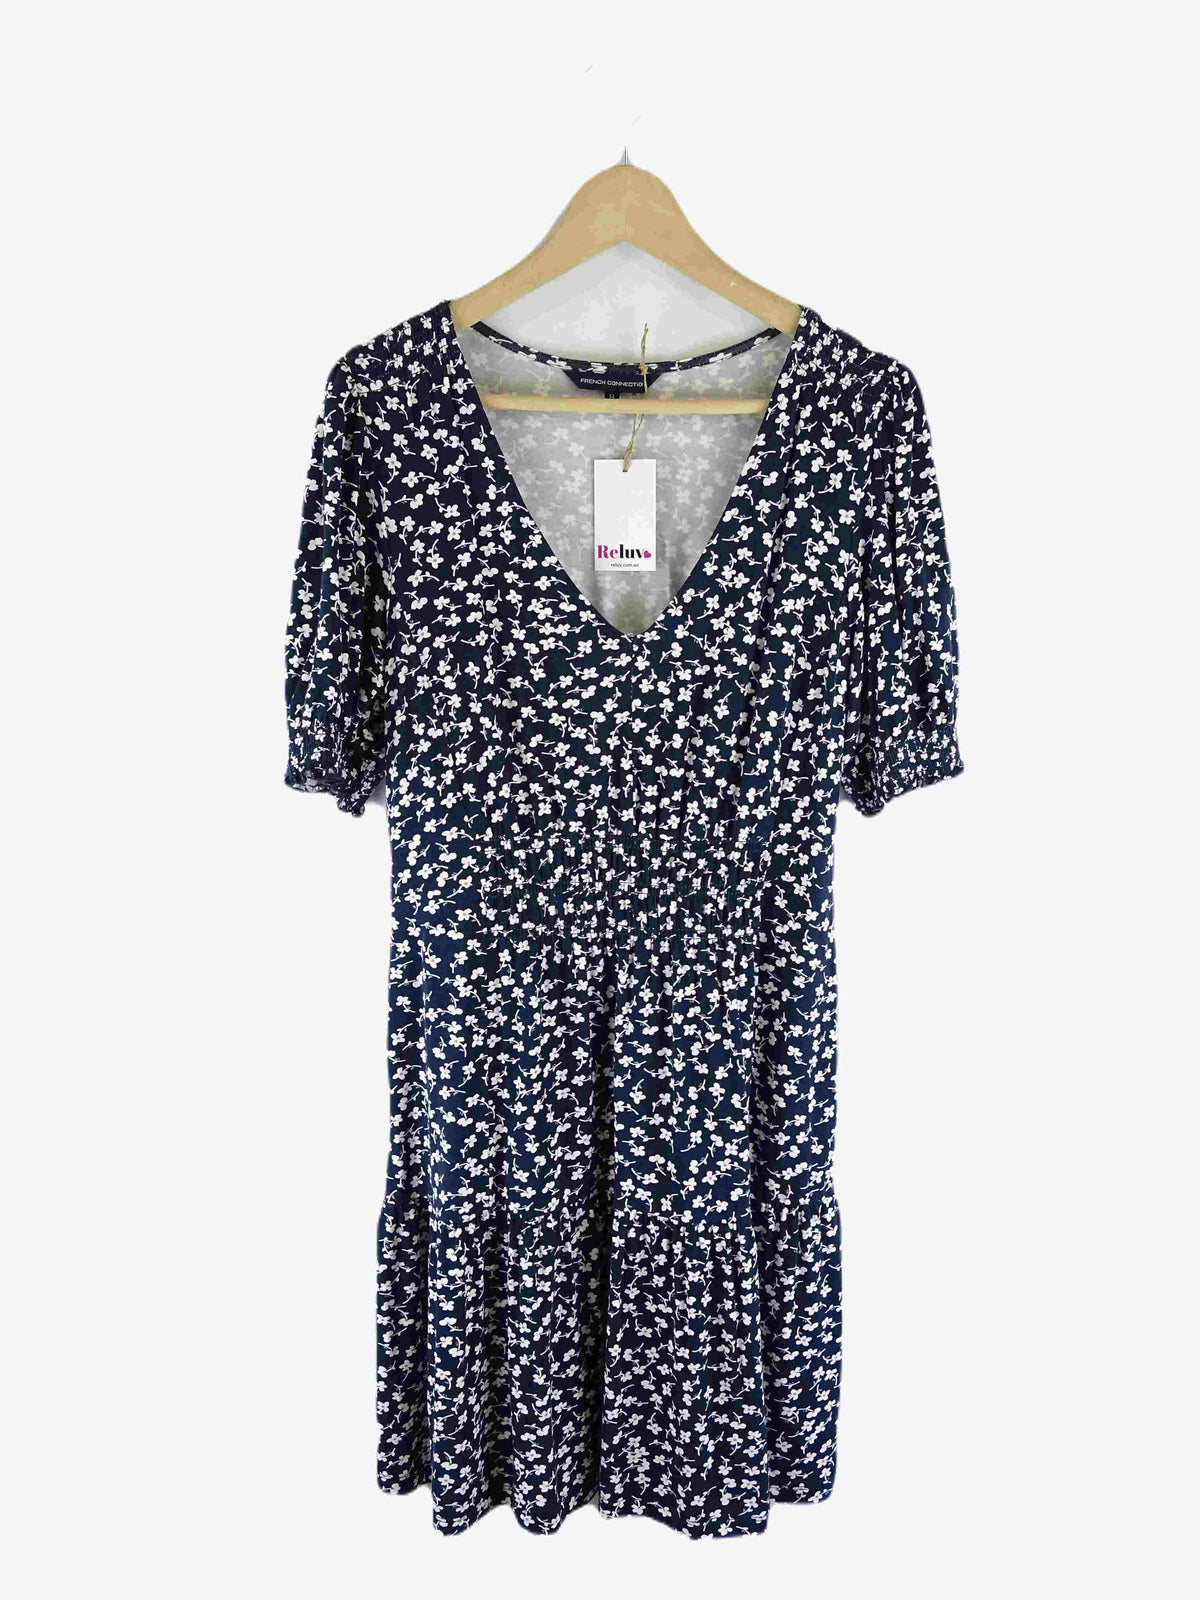 French Connection Navy Floral Dress 8